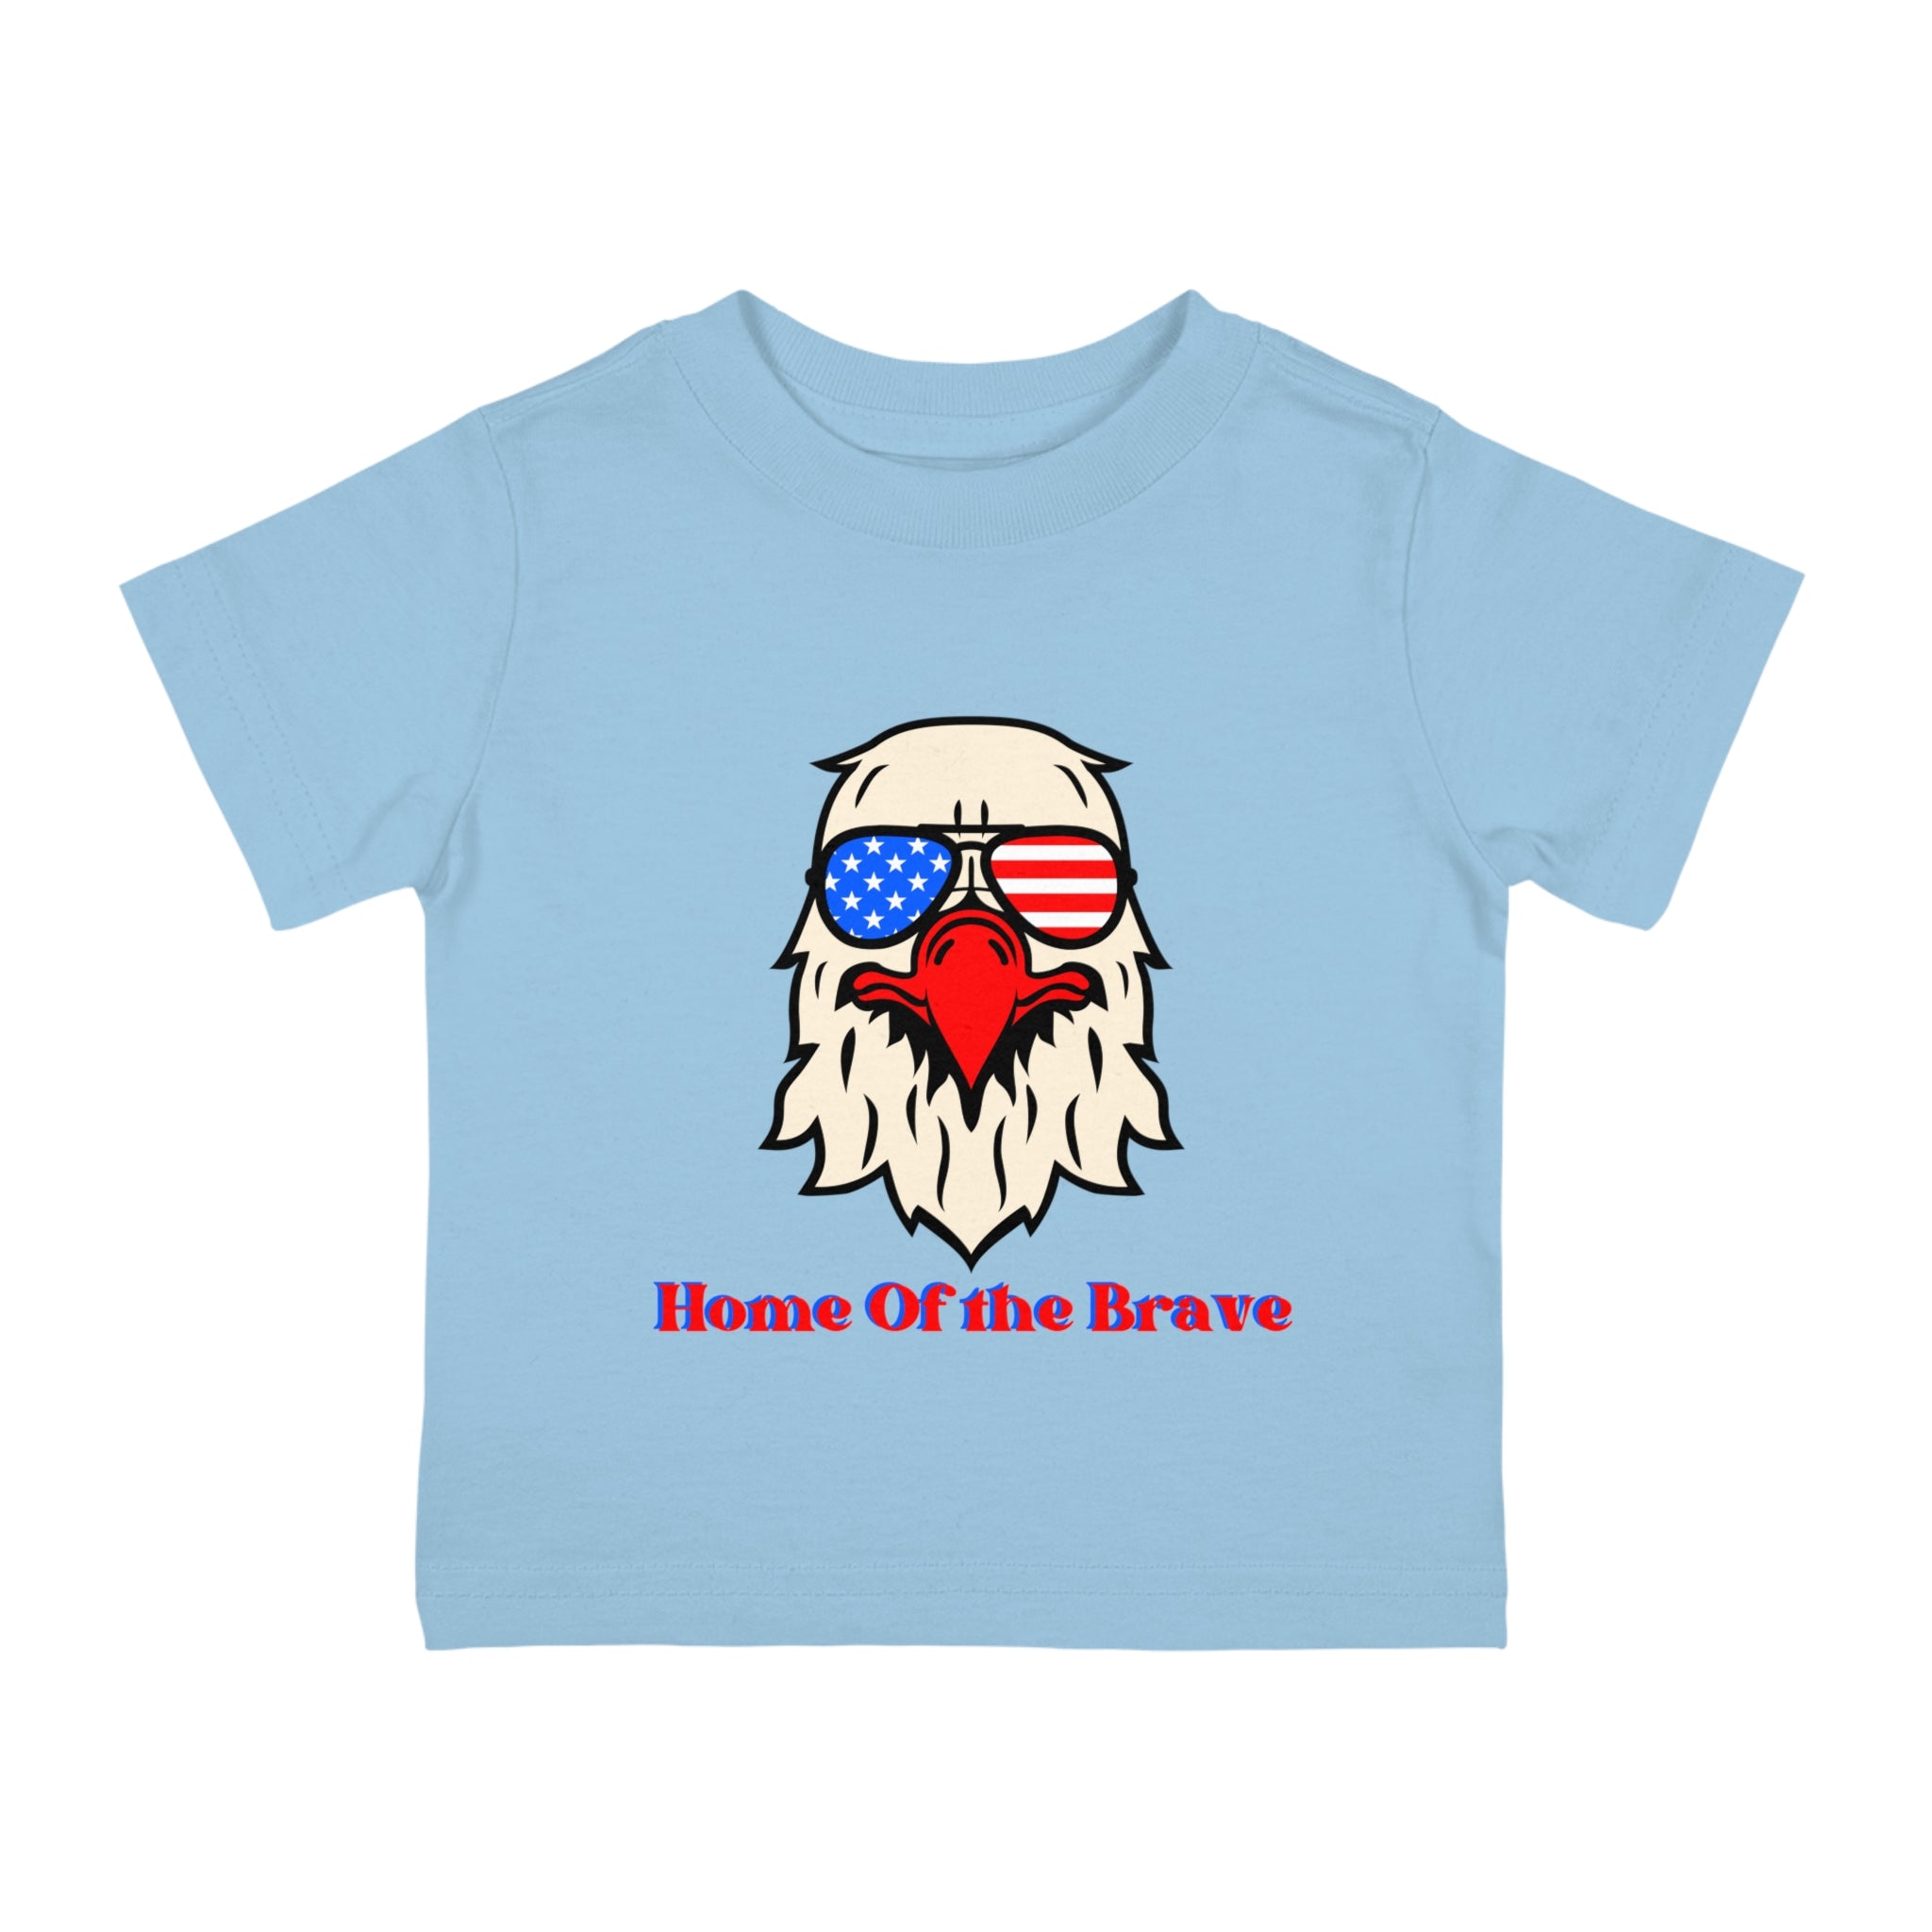 Home Of The Brave Infant Shirt, Baby Tee, Infant Tee